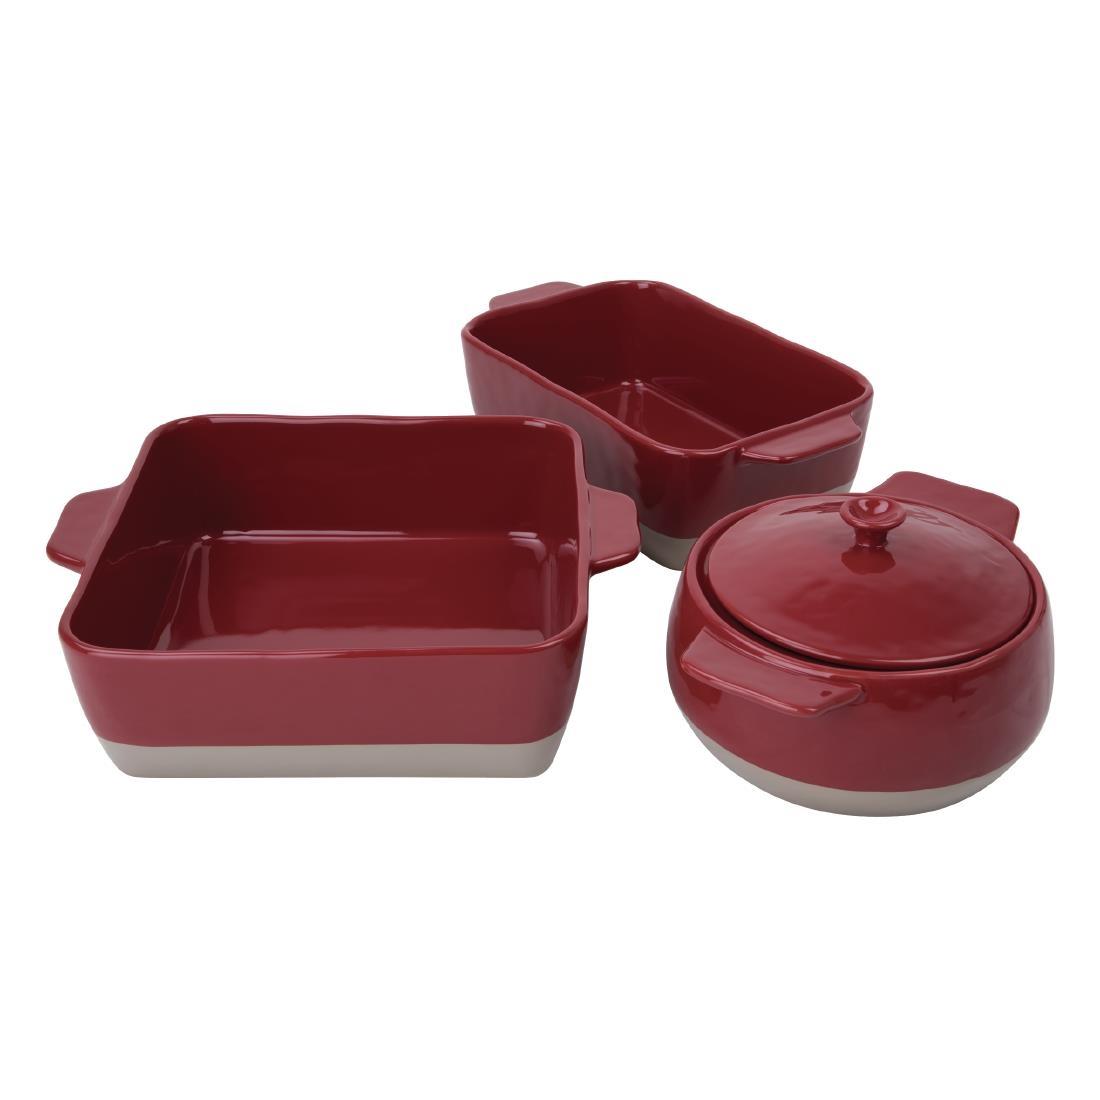 Olympia Red And Taupe Ceramic Roasting Dish 4.2Ltr - DB527  - 2